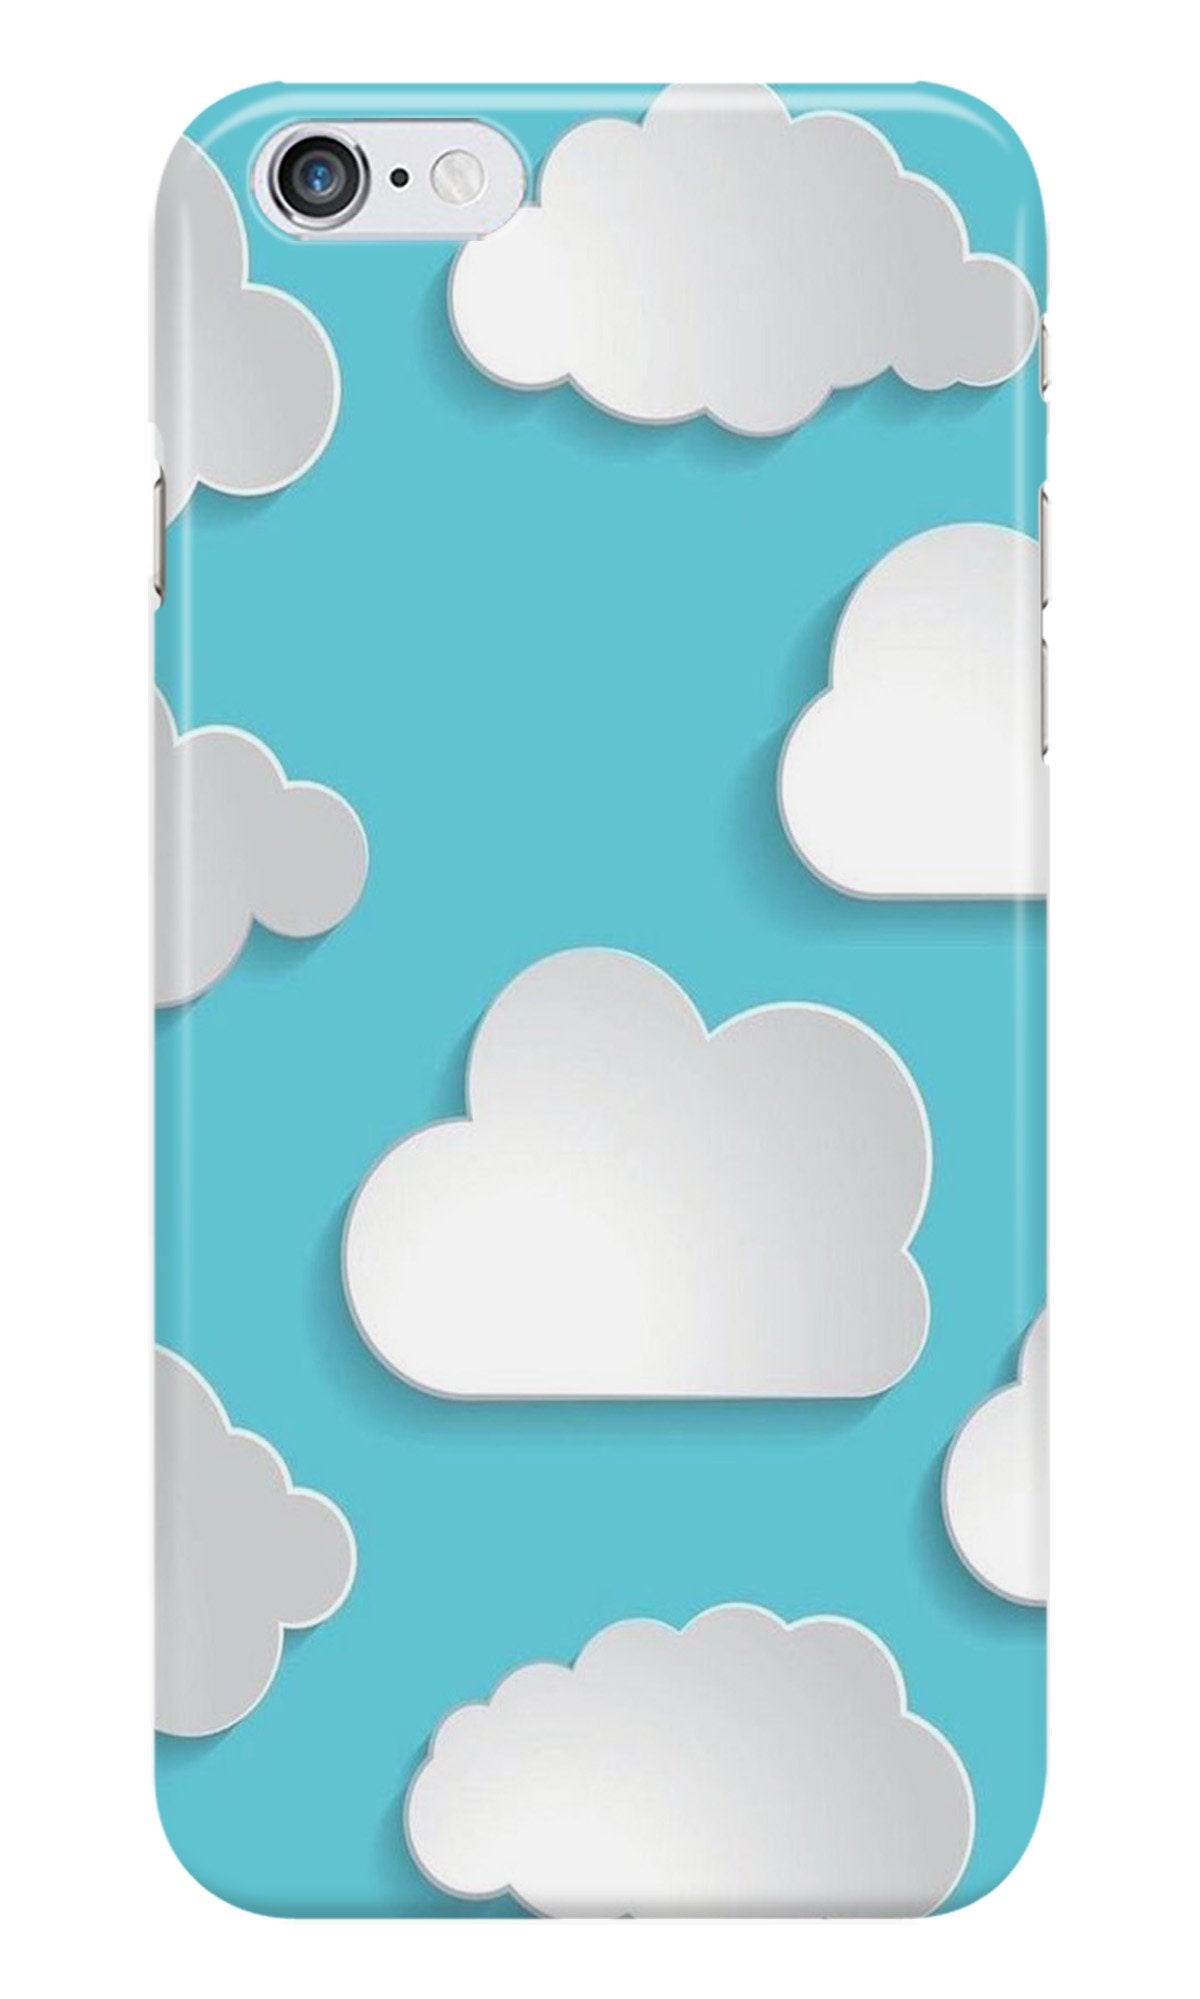 Clouds Case for Iphone 6/6S (Design No. 210)